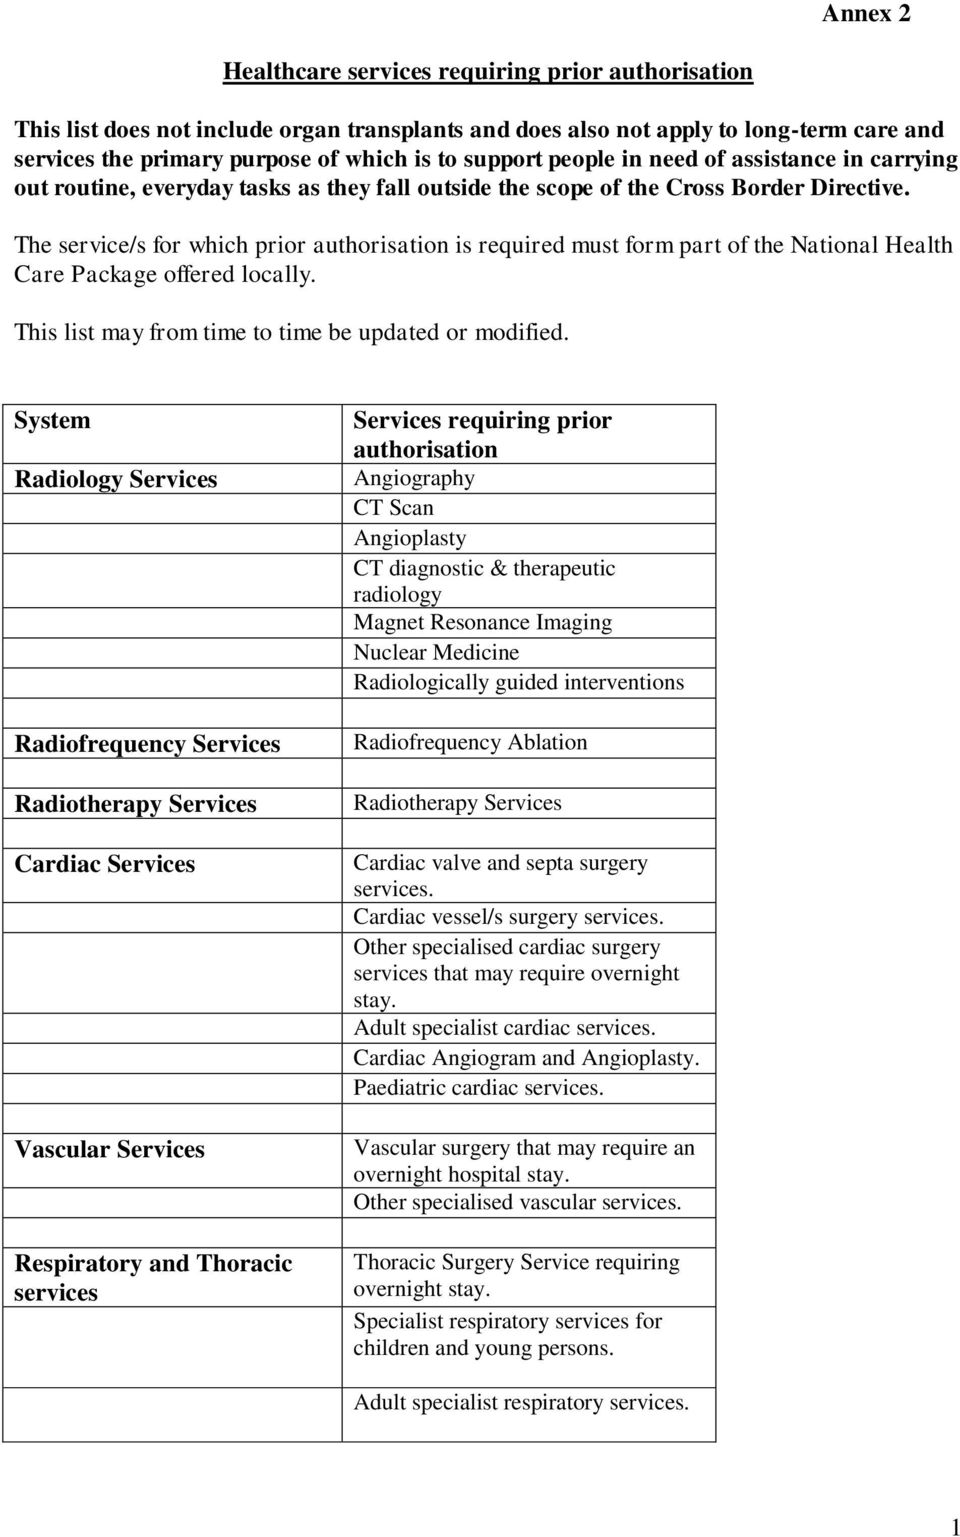 The service/s for which prior authorisation is required must form part of the National Health Care Package offered locally. This list may from time to time be updated or modified.